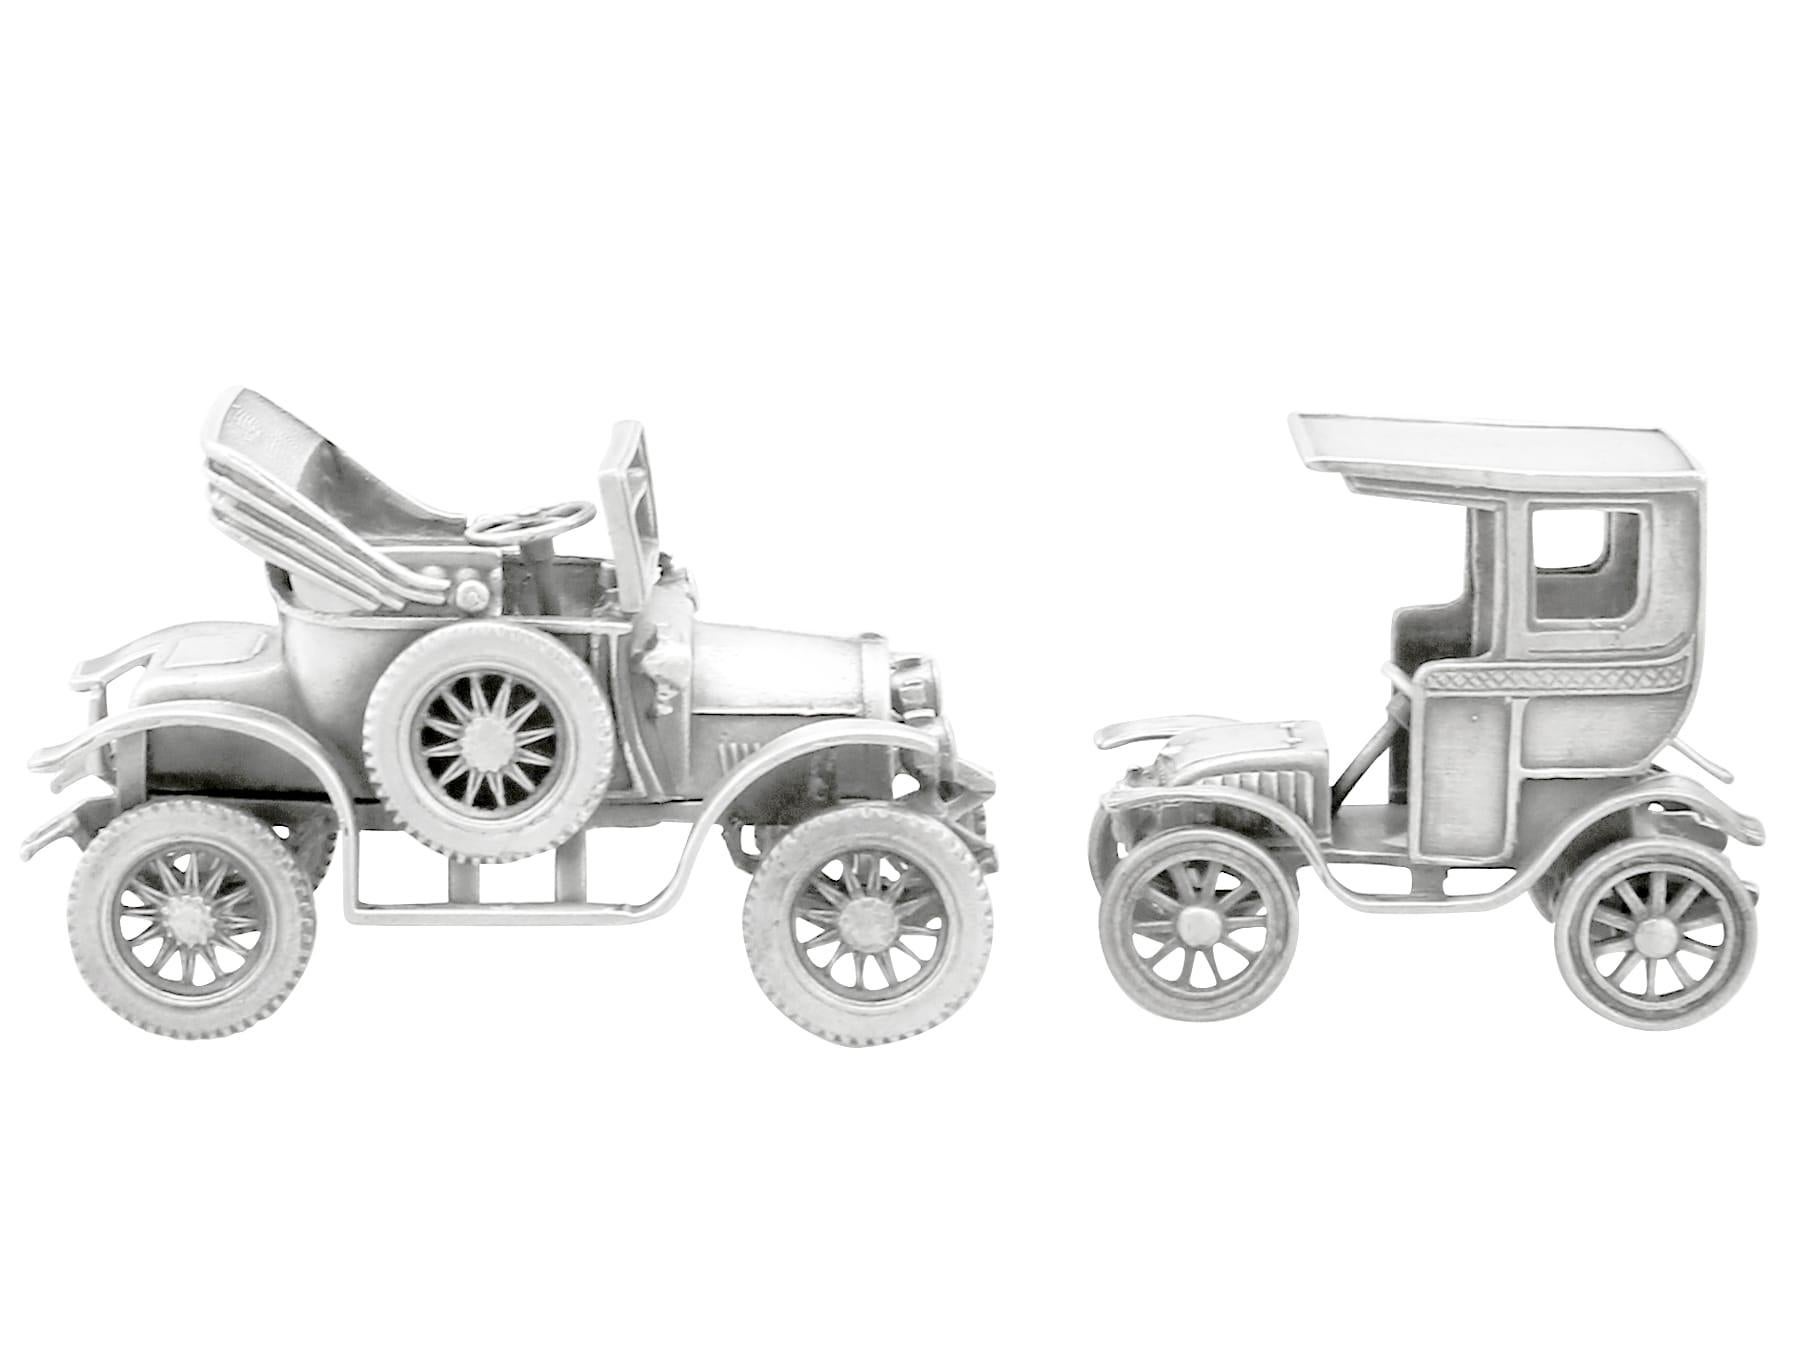 A fine and impressive pair of vintage Italian sterling silver table ornaments realistically modelled in the form of cars; an addition to our ornamental silverware collection

These impressive vintage Italian cast sterling silver table ornaments